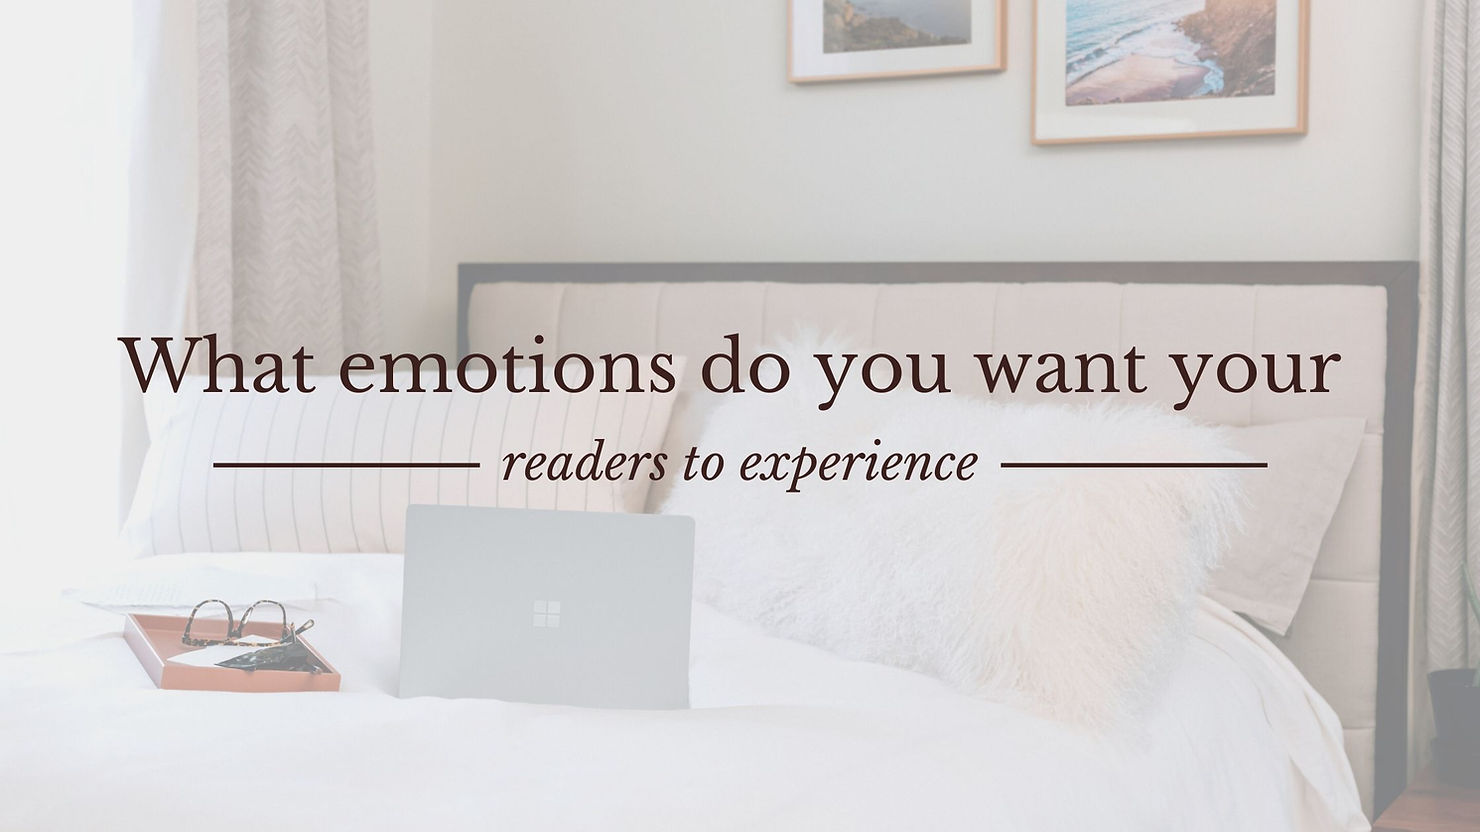 Using emotions to help brand your blog.